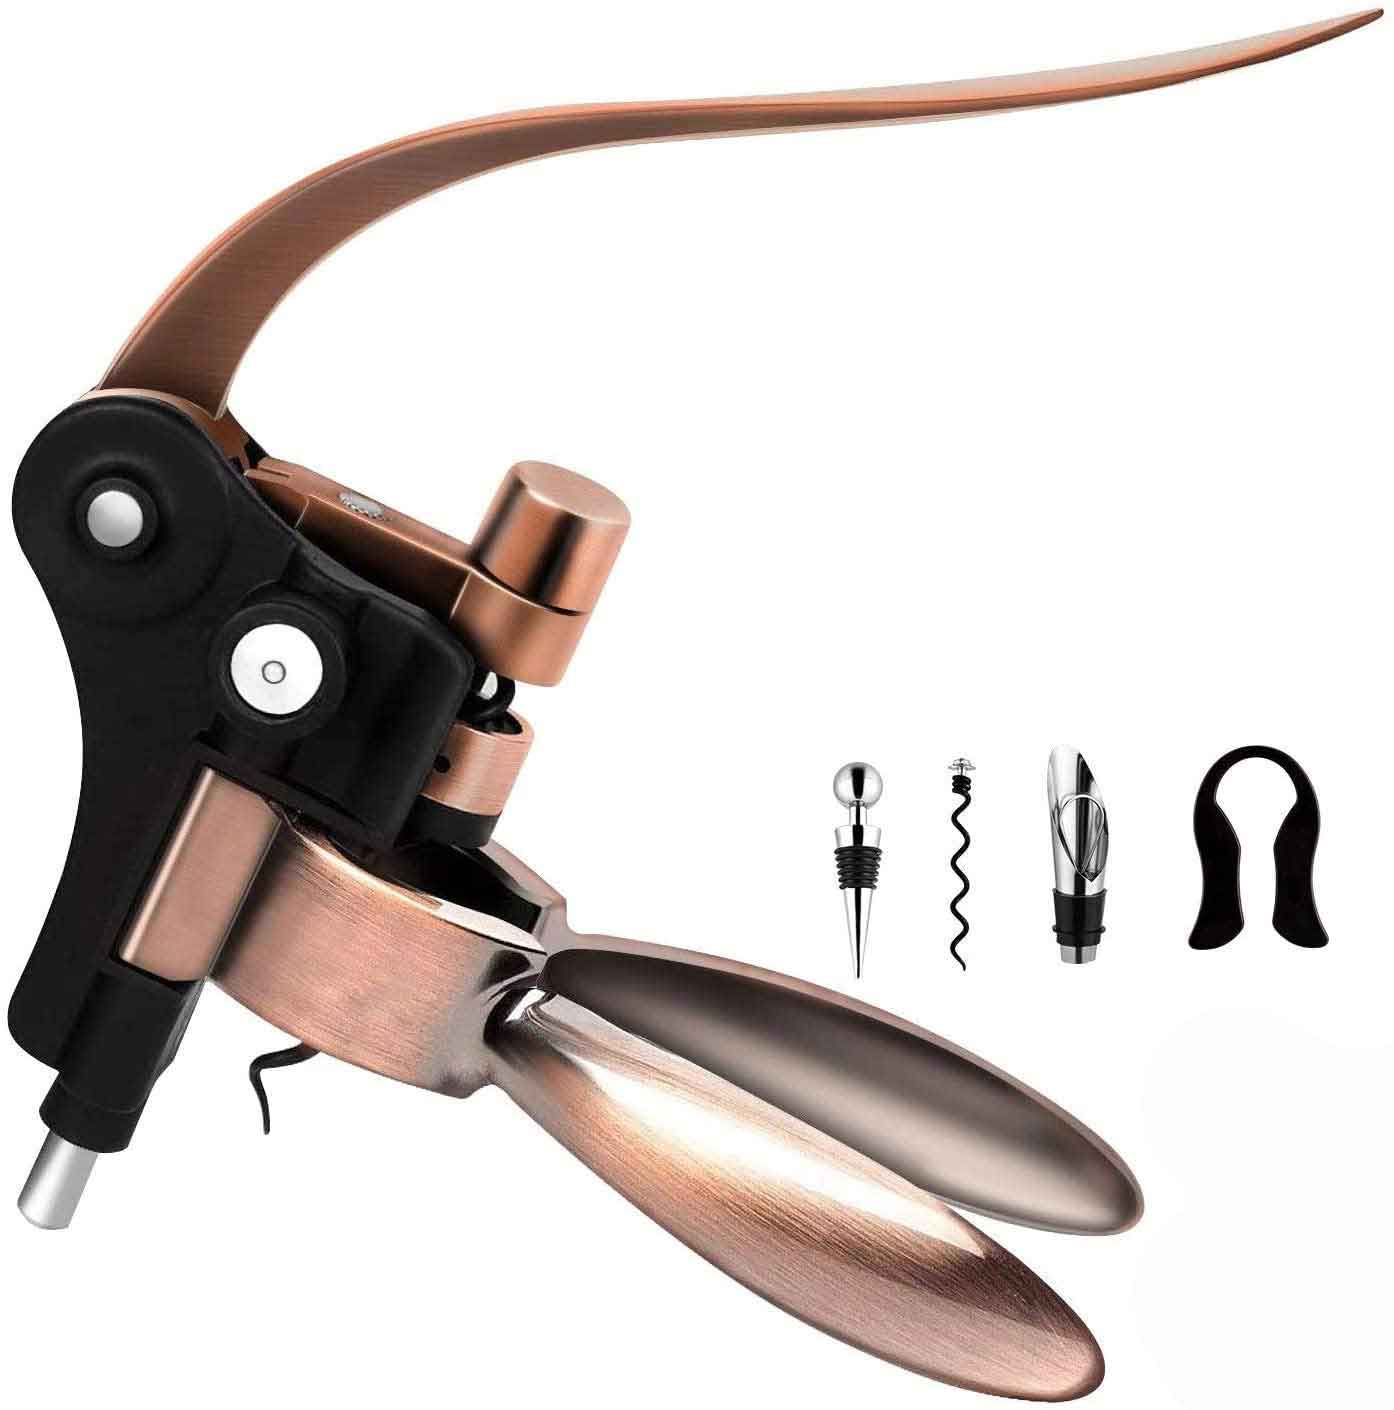 Upgraded Wine Opener Kit With Foil Cutter,Wine Stopper And Extra Spiral(Bronze)